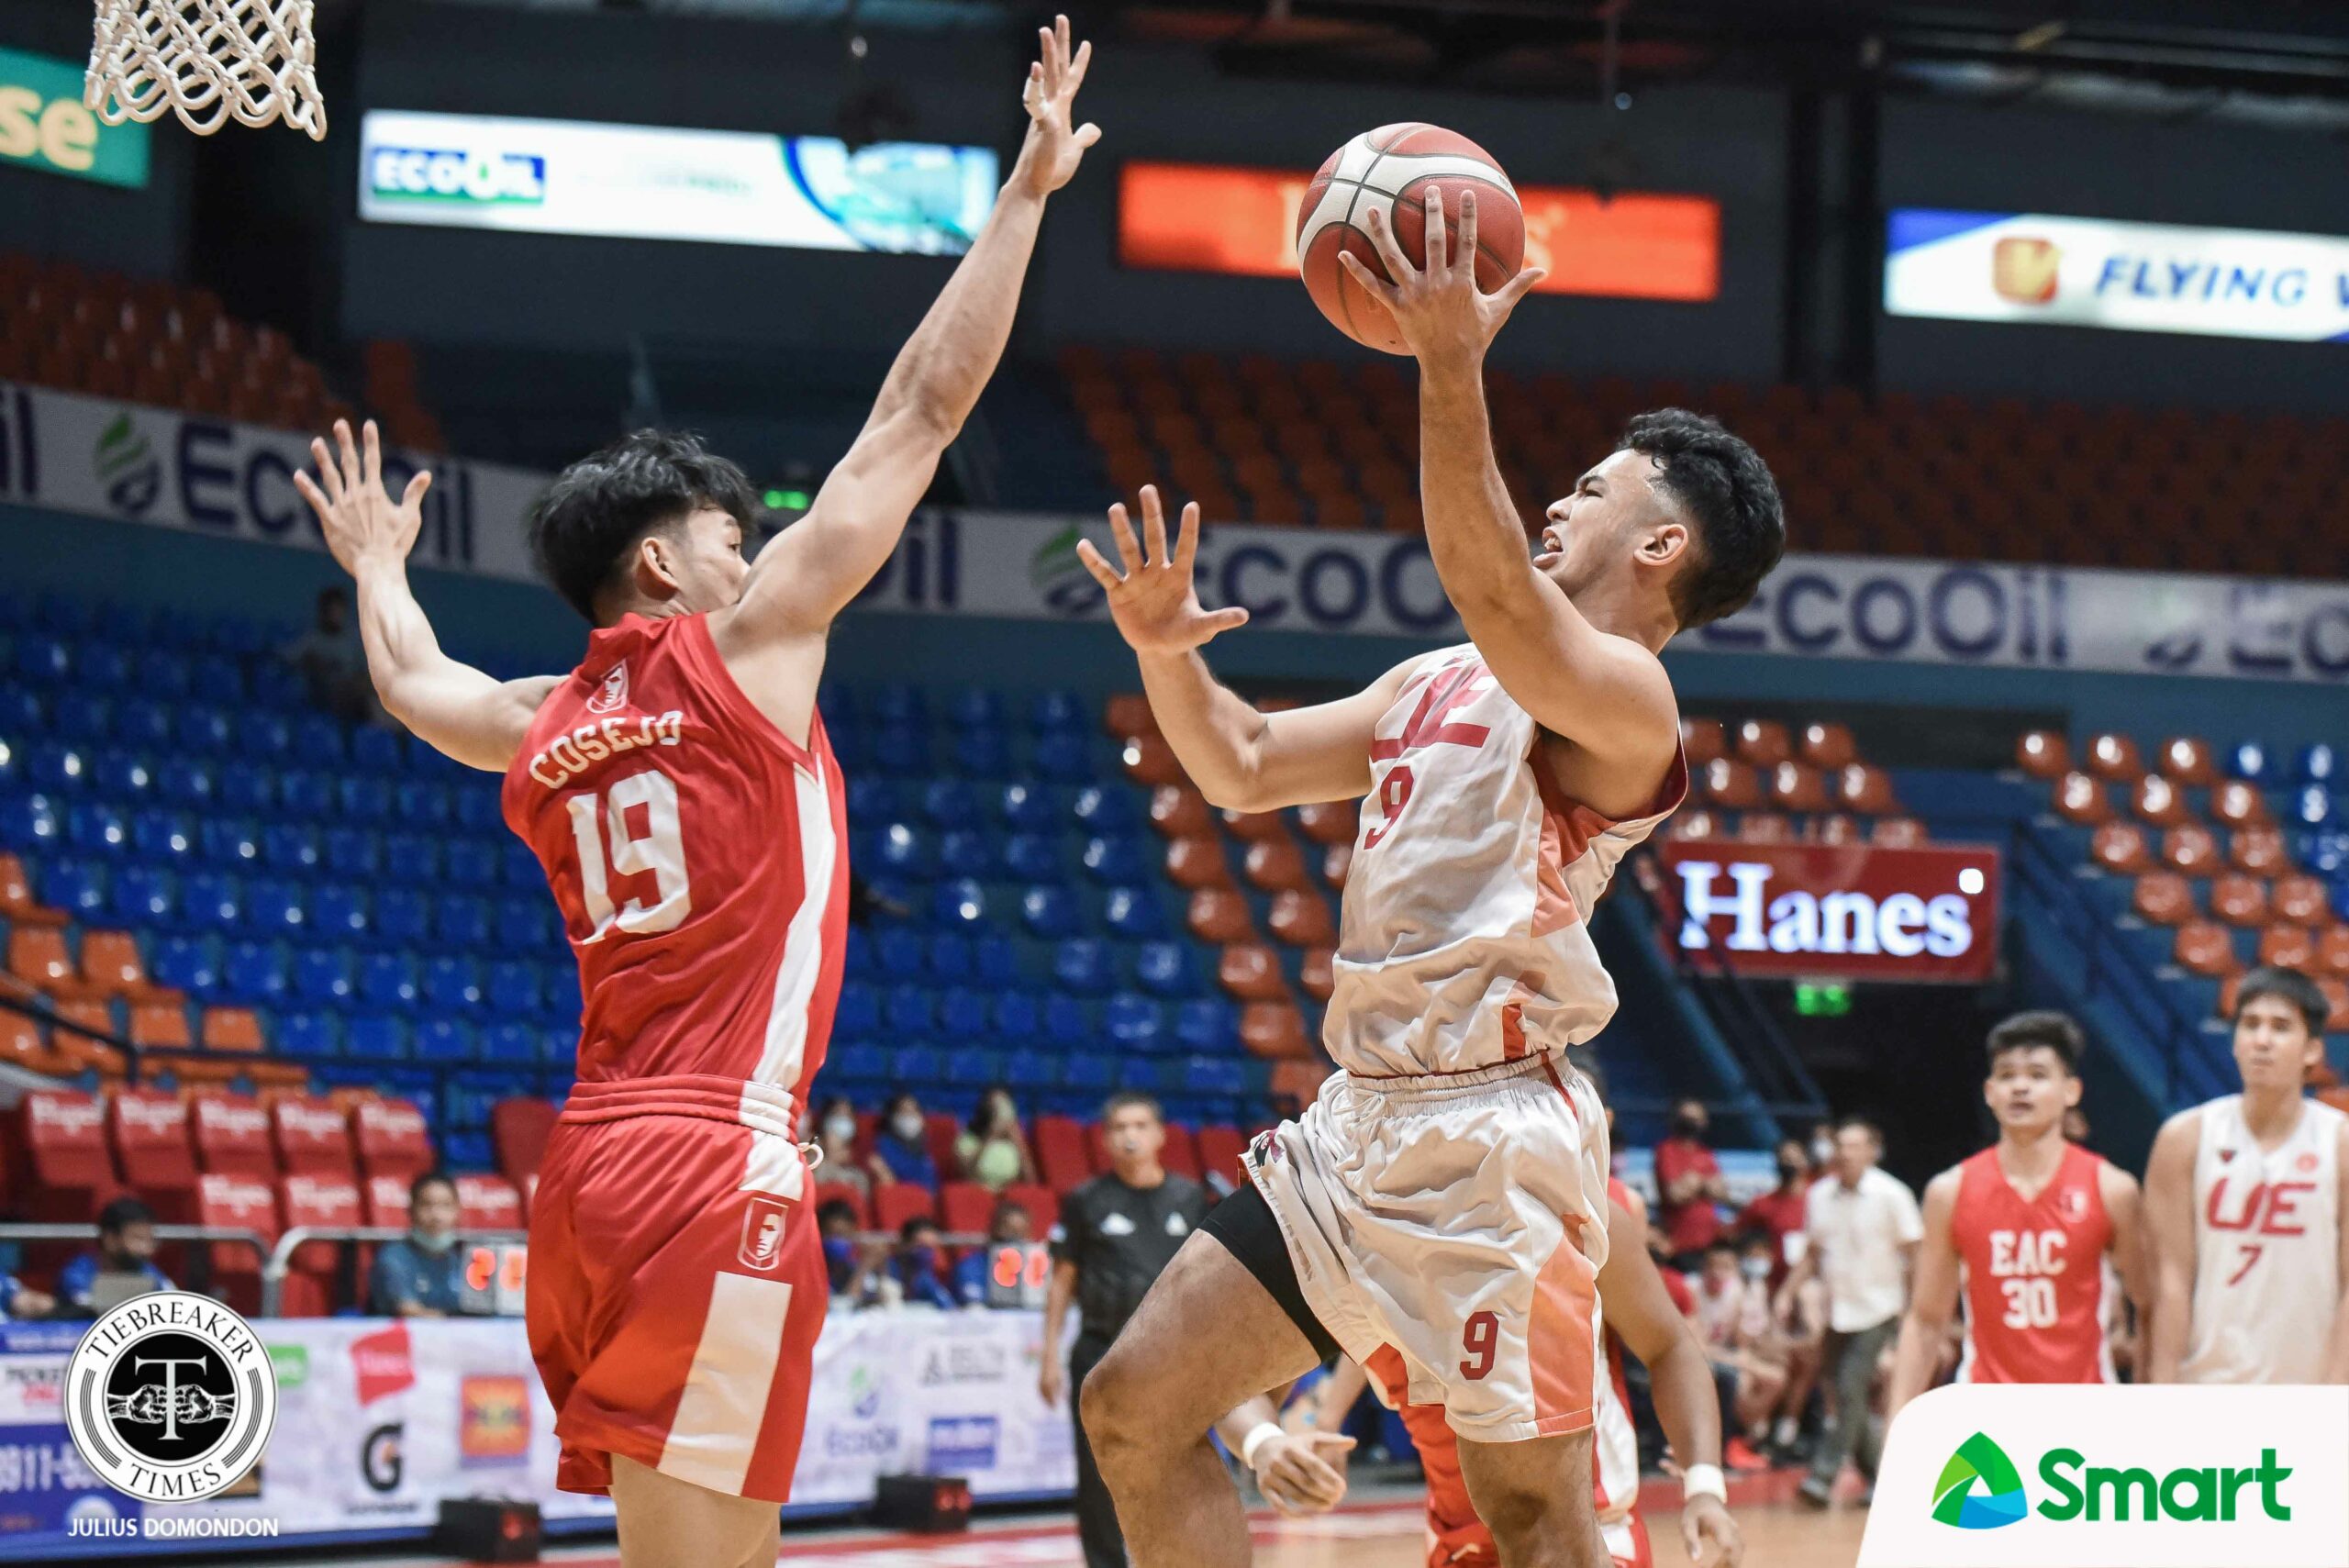 FOEO-MBB-Harvey-Pagsanjan-1-scaled Mourning EAC's lost Cinderella run, Cabiltes eyes redemption with souped-up Generals for NCAA 100 Basketball EAC NCAA News  - philippine sports news